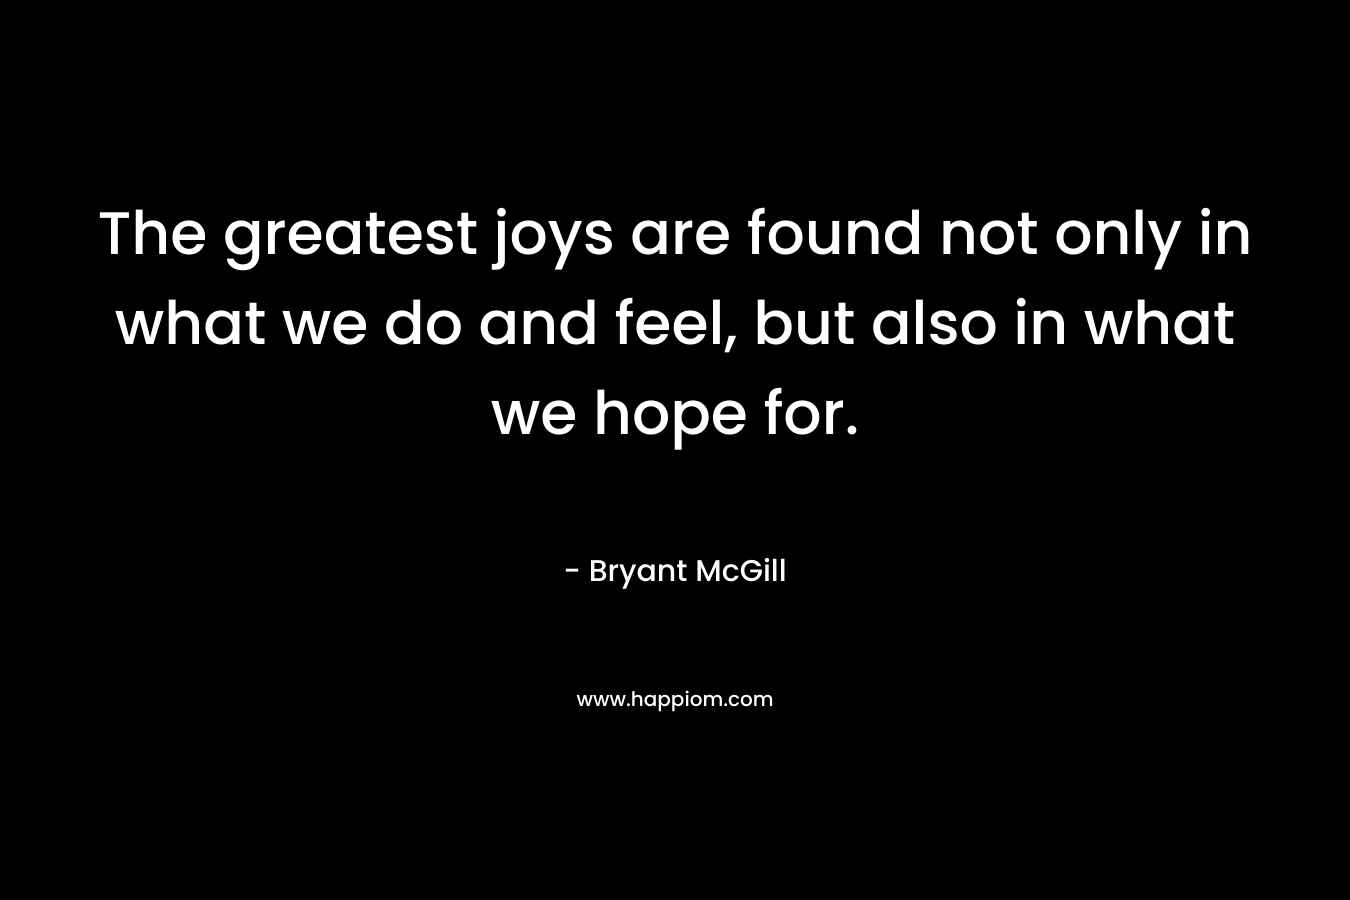 The greatest joys are found not only in what we do and feel, but also in what we hope for.